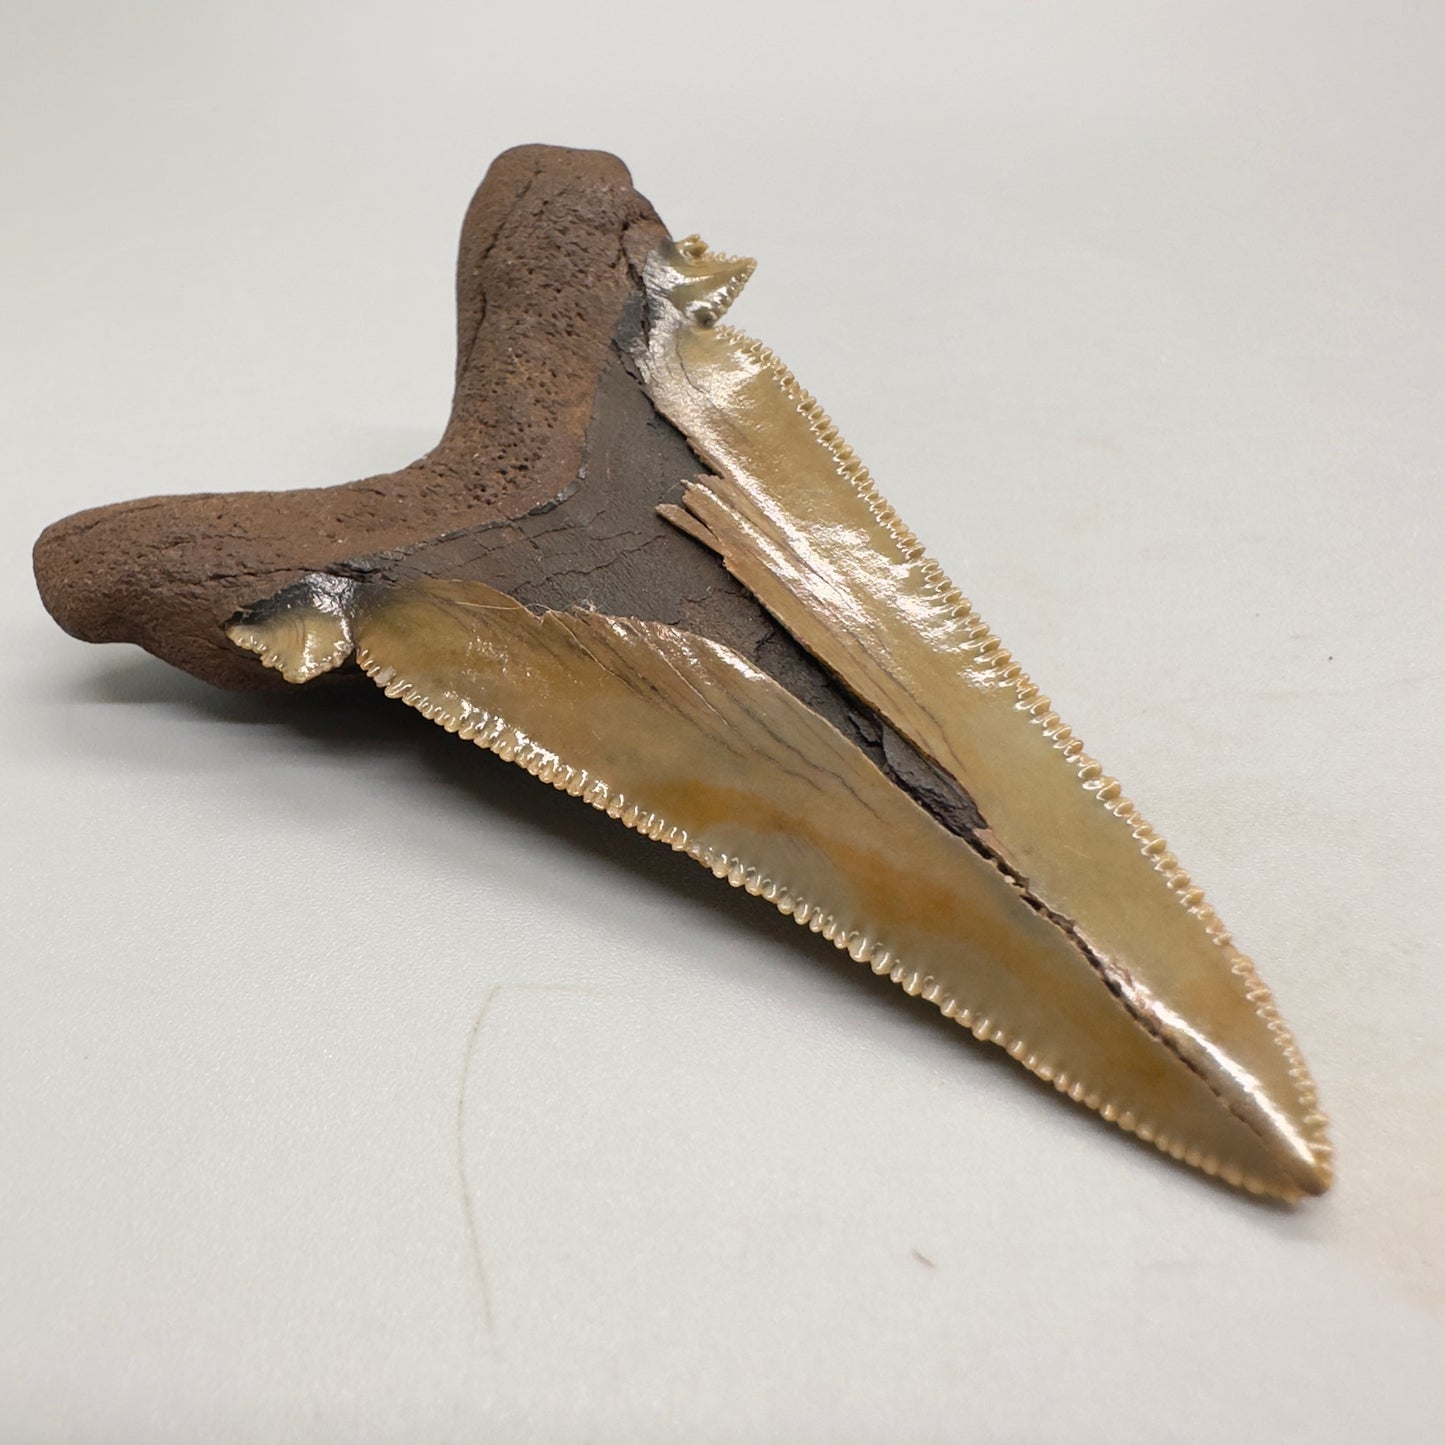 Large 2.91 inches sharply serrated Carcharocles sokolowi (auriculatus) shark tooth from North Carolina AU360 back left